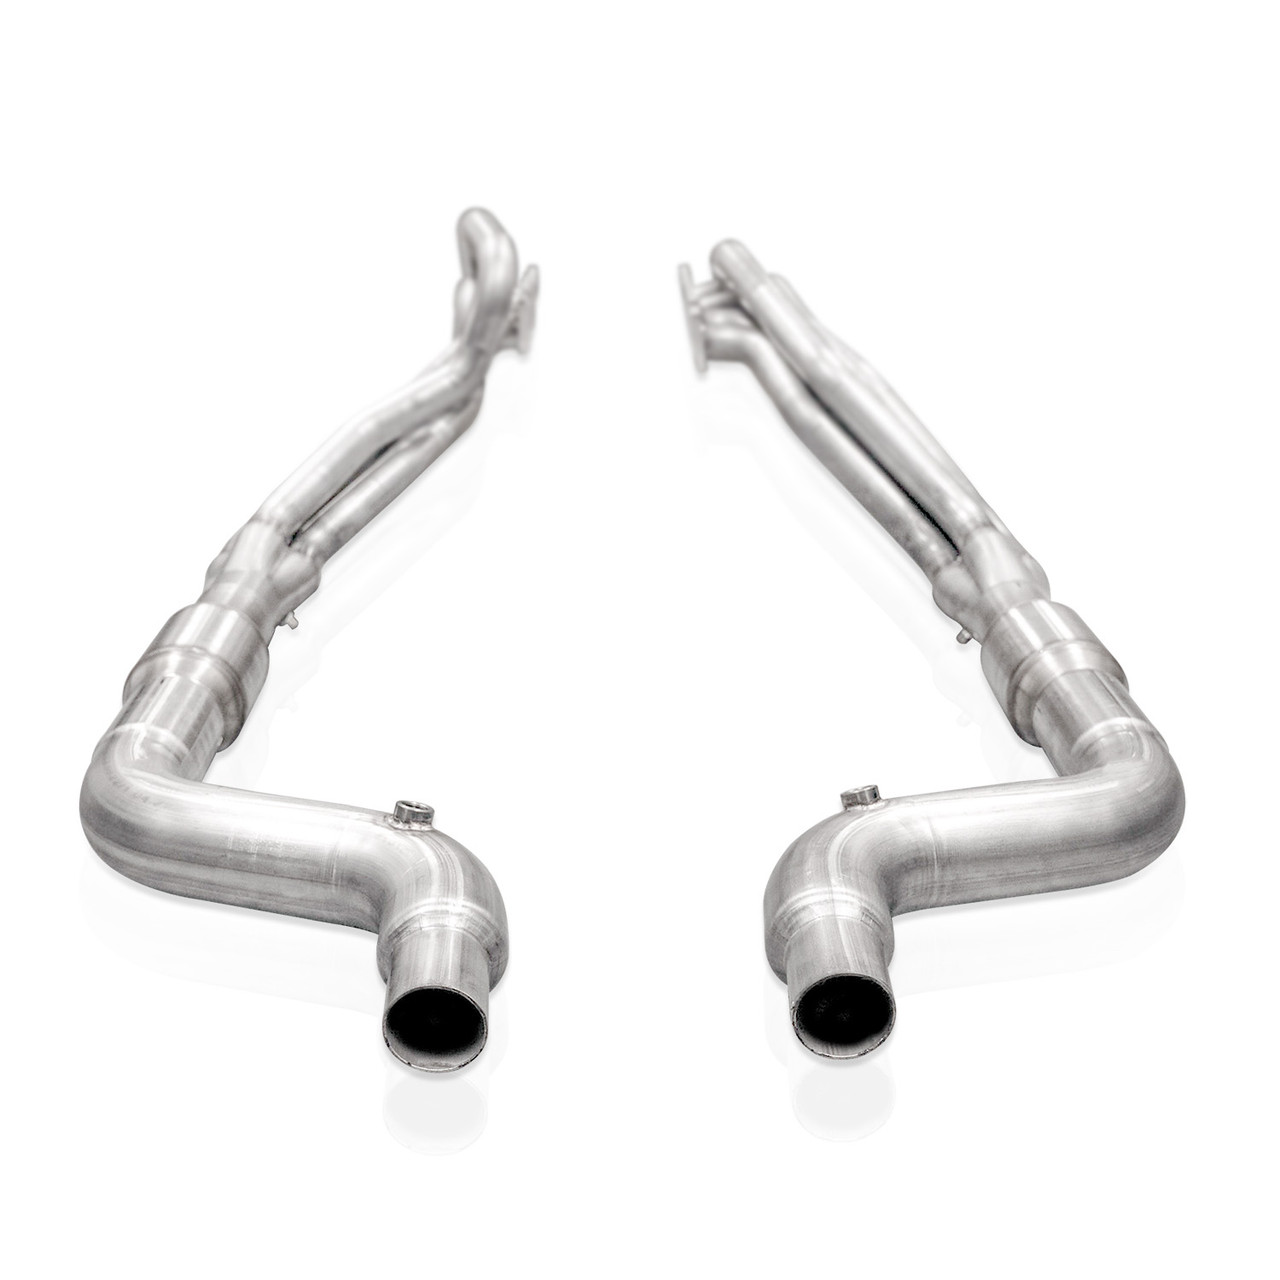 Stainless Works 1 7/8" Long Tube Headers w. High Flow Cats / Aftermarket Connect - S550 / S650 Mustang (M24H3CATLG)